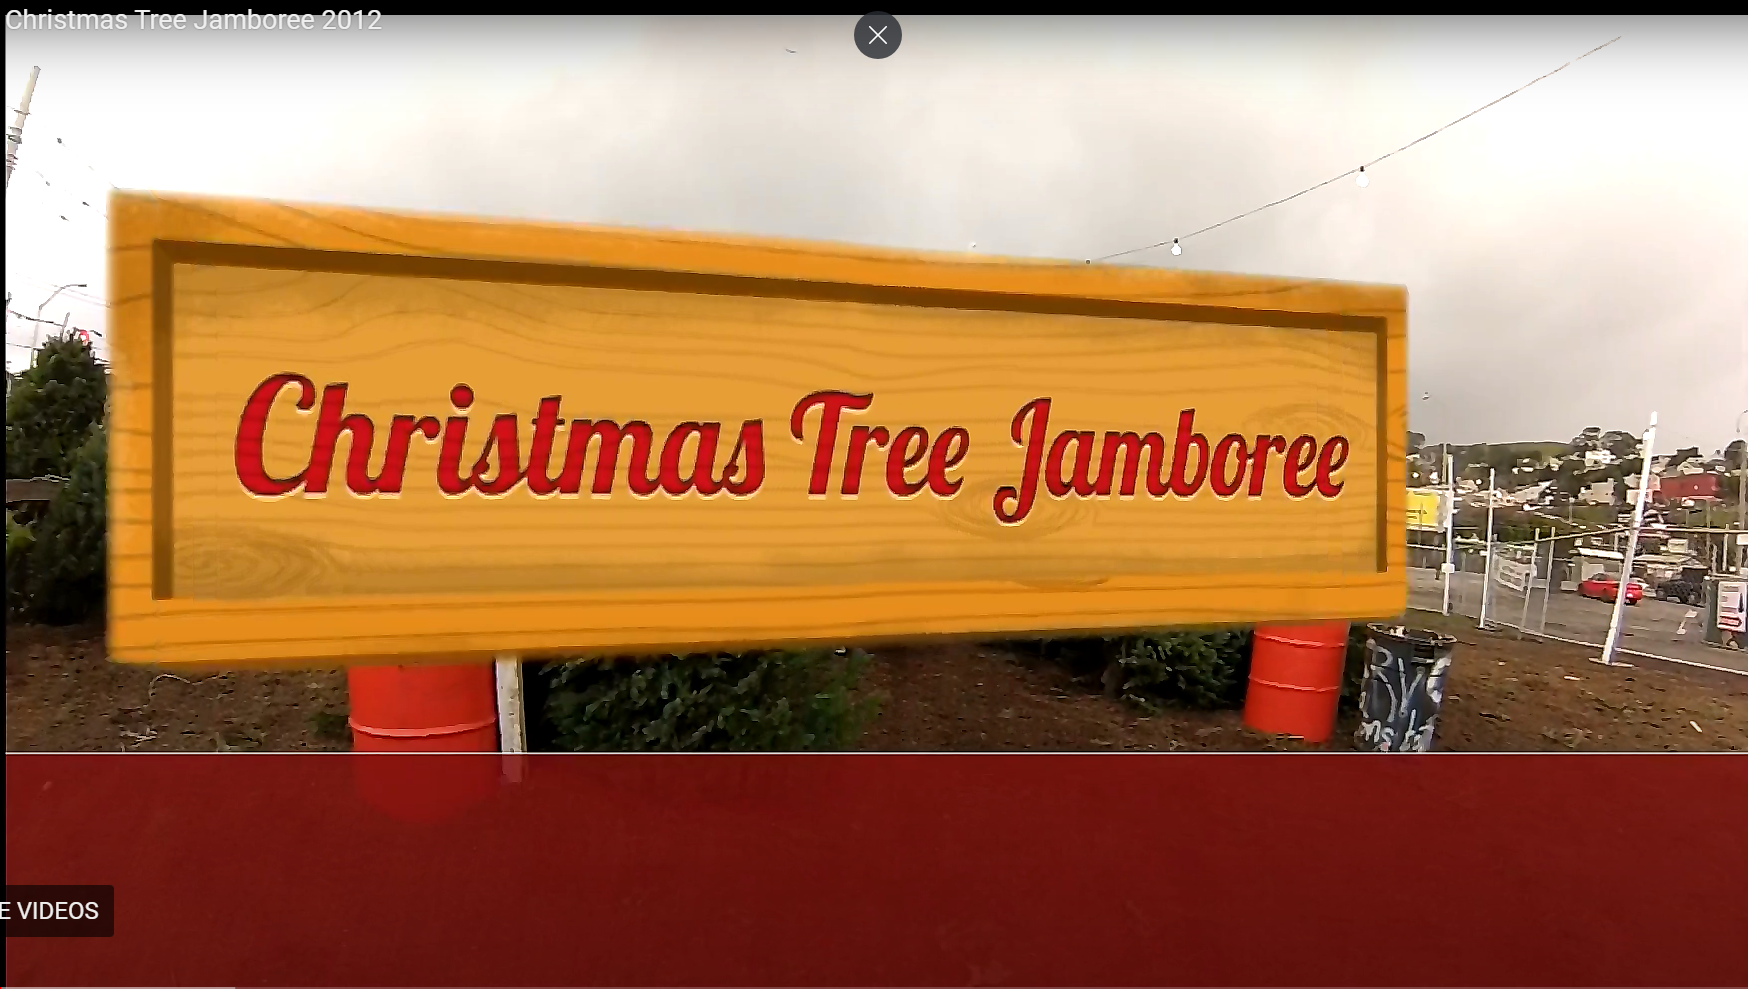 Christmas Tree Jamboree Promotional Video produced by PLGH Advisors.